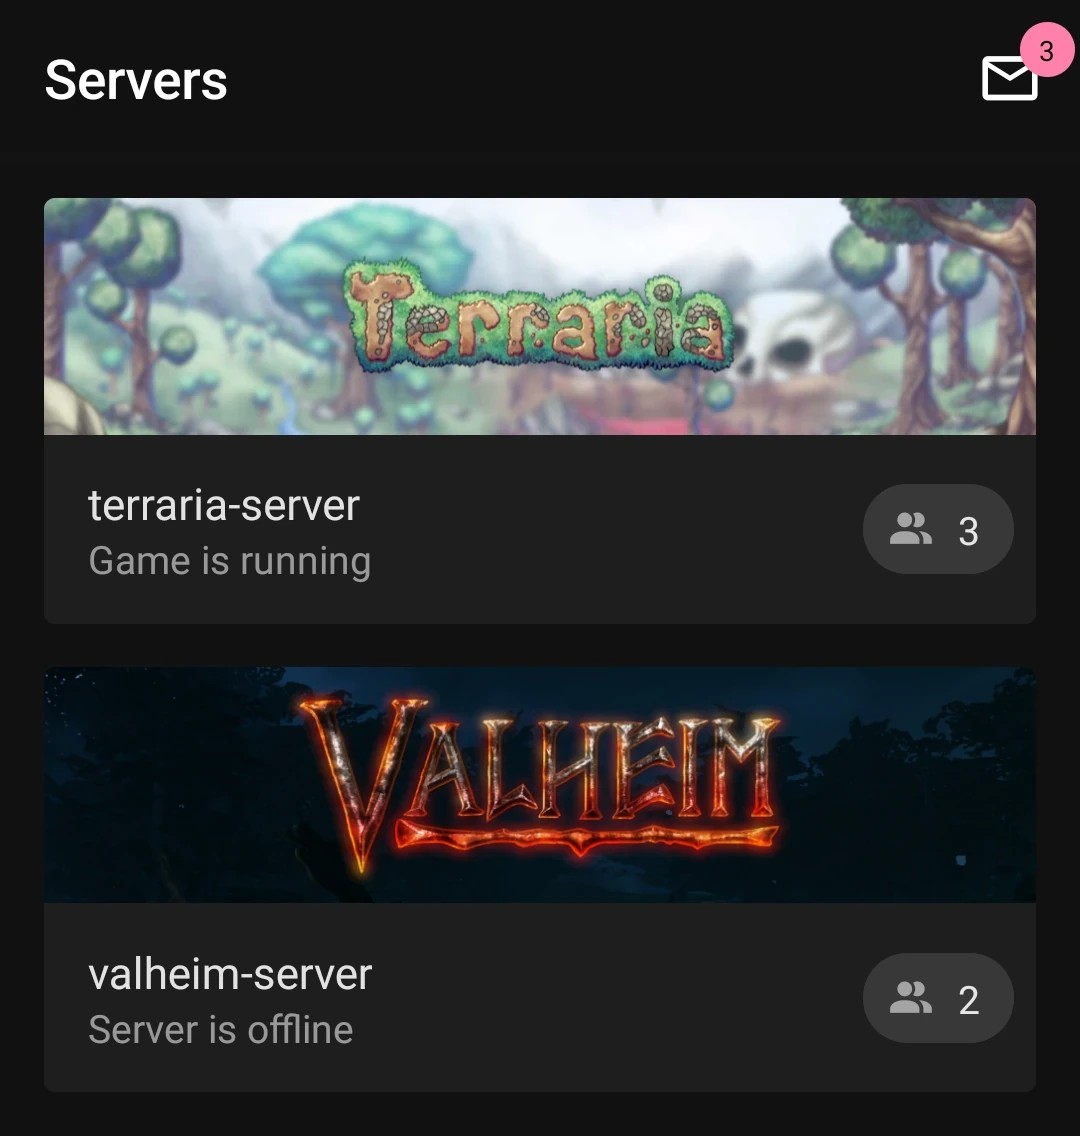 A list of the users servers